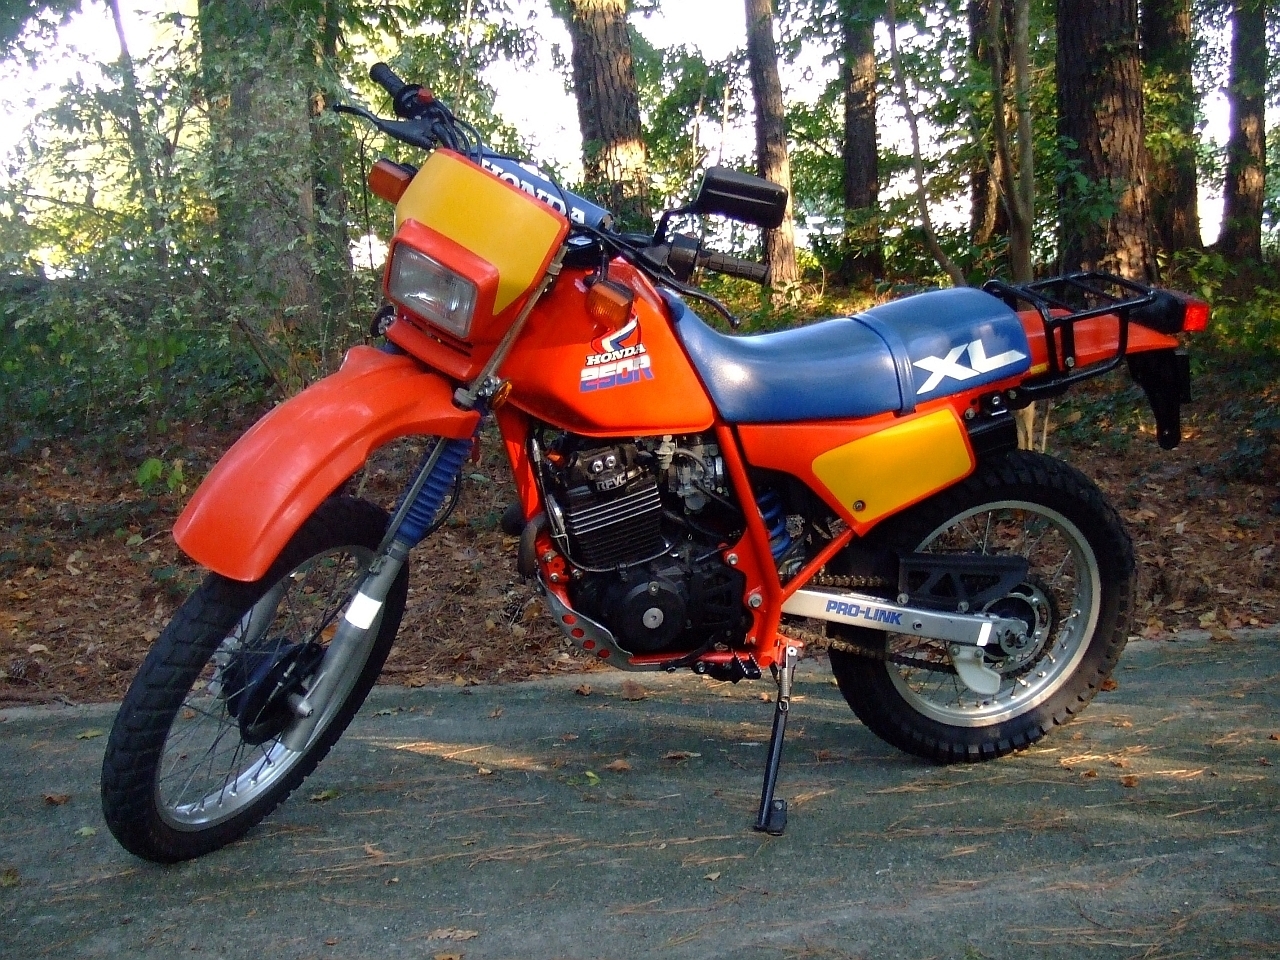 Review Of Honda Xl 250 R 1985 Pictures Live Photos Description Honda Xl 250 R 1985 Lovers Of Motorcycles